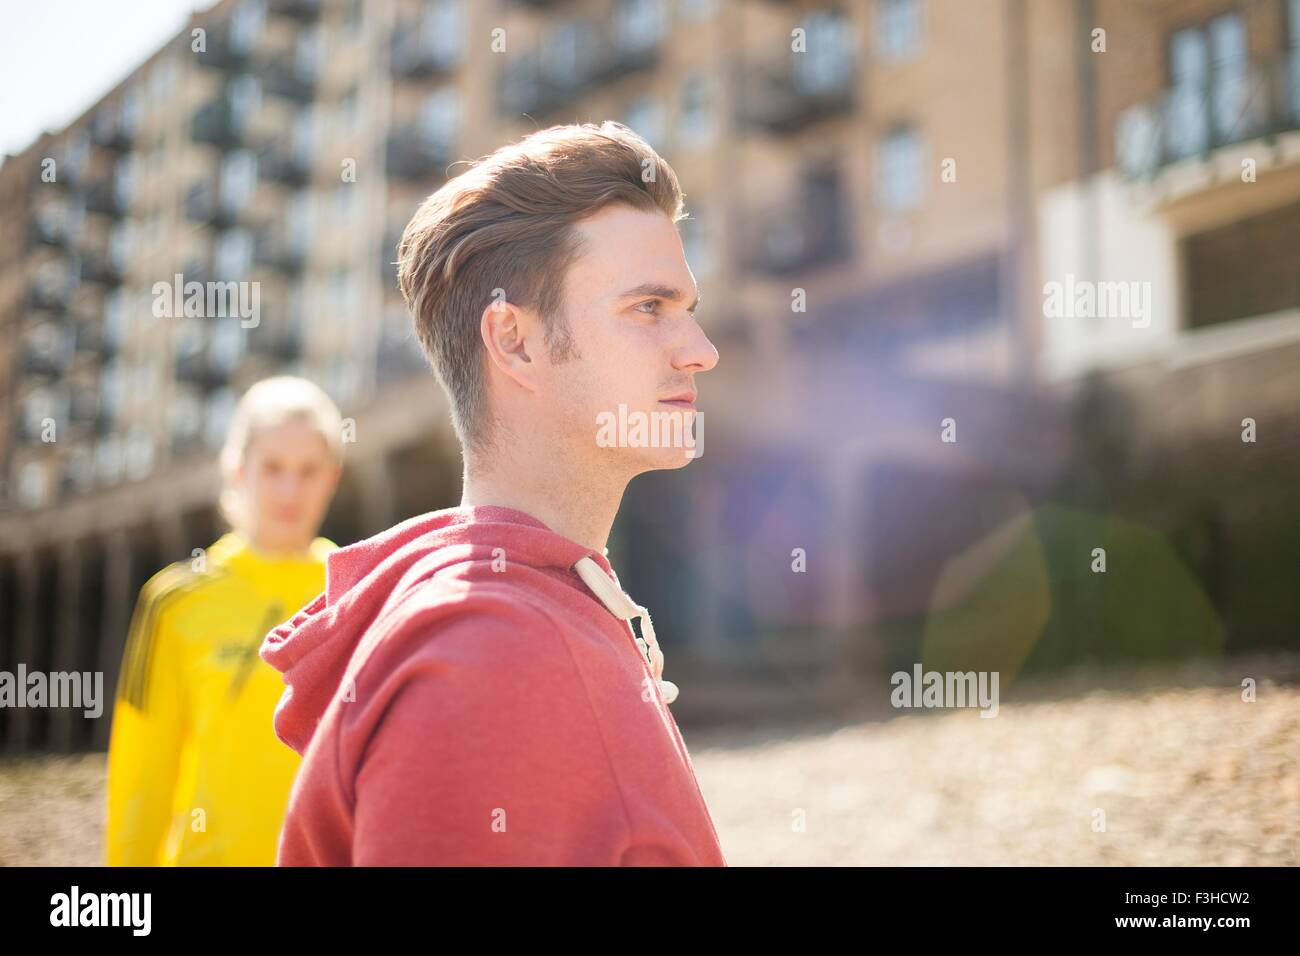 Runners standing by building block, Wapping, London Stock Photo